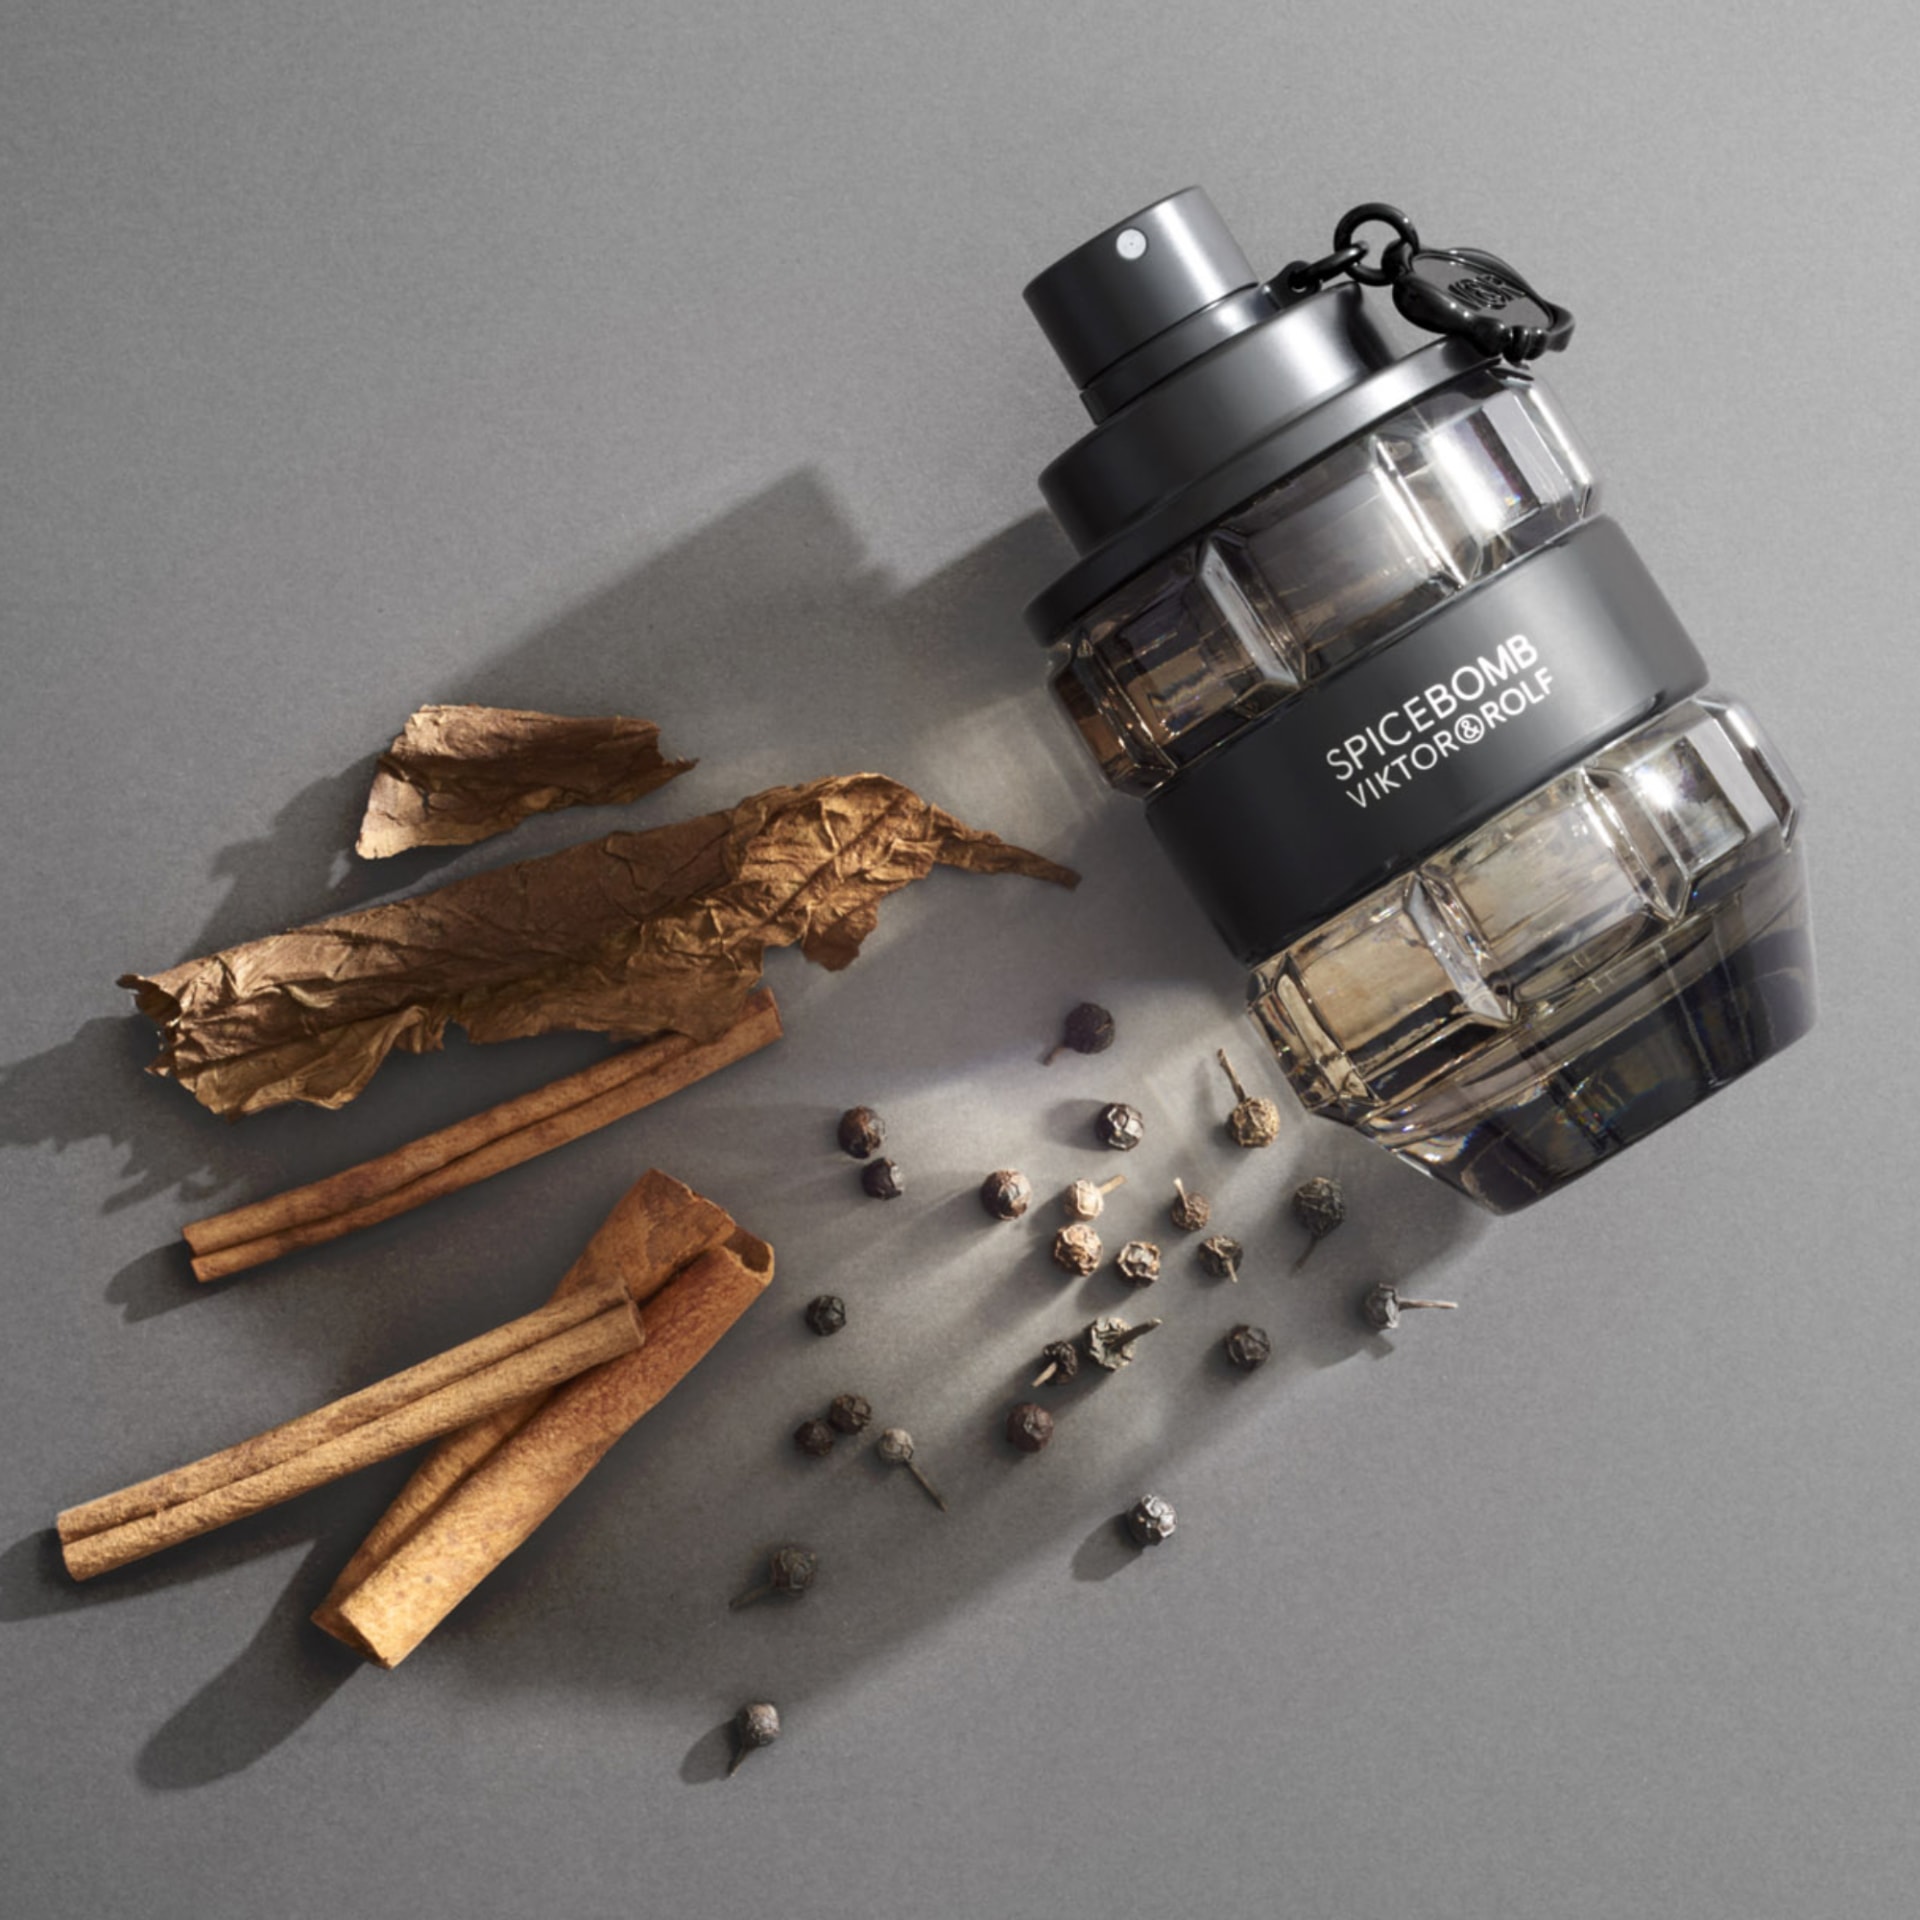 spicebomb extreme by viktor and rolf